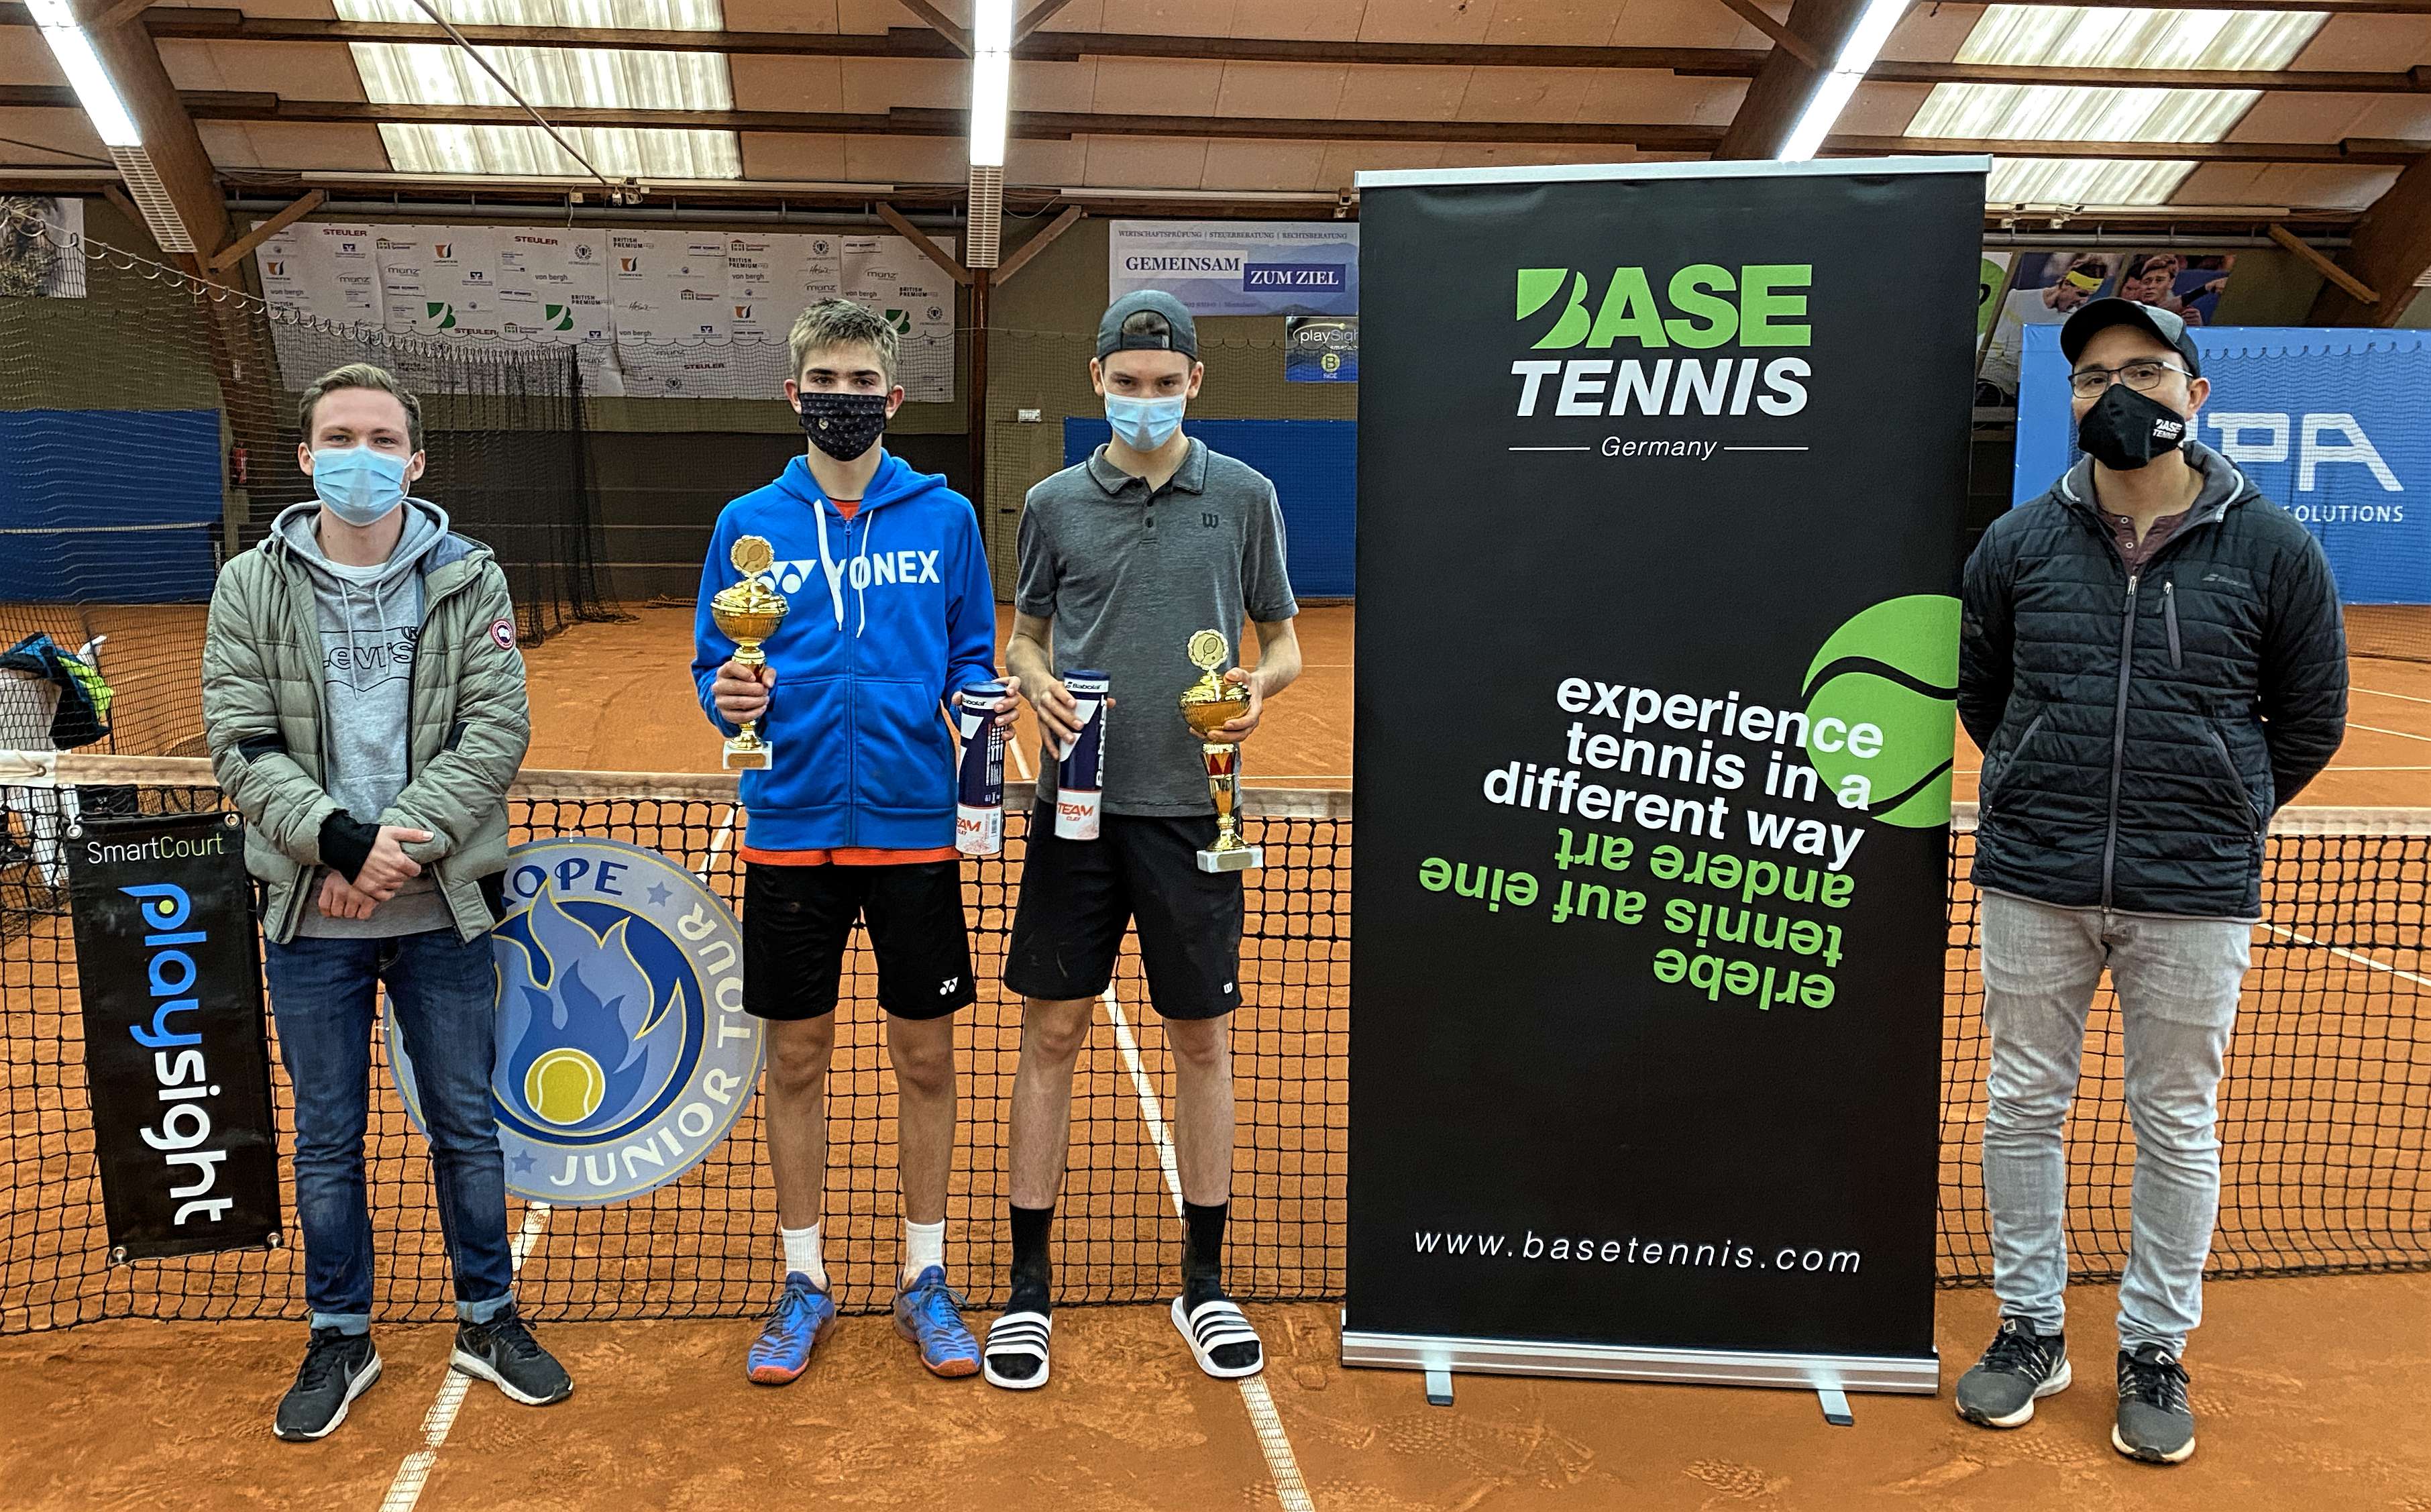 Max Stentzer (GER) and Mathilde Ngijol Carre (FRA) crowned champions of 2. Edition of the International Playsight Cup!